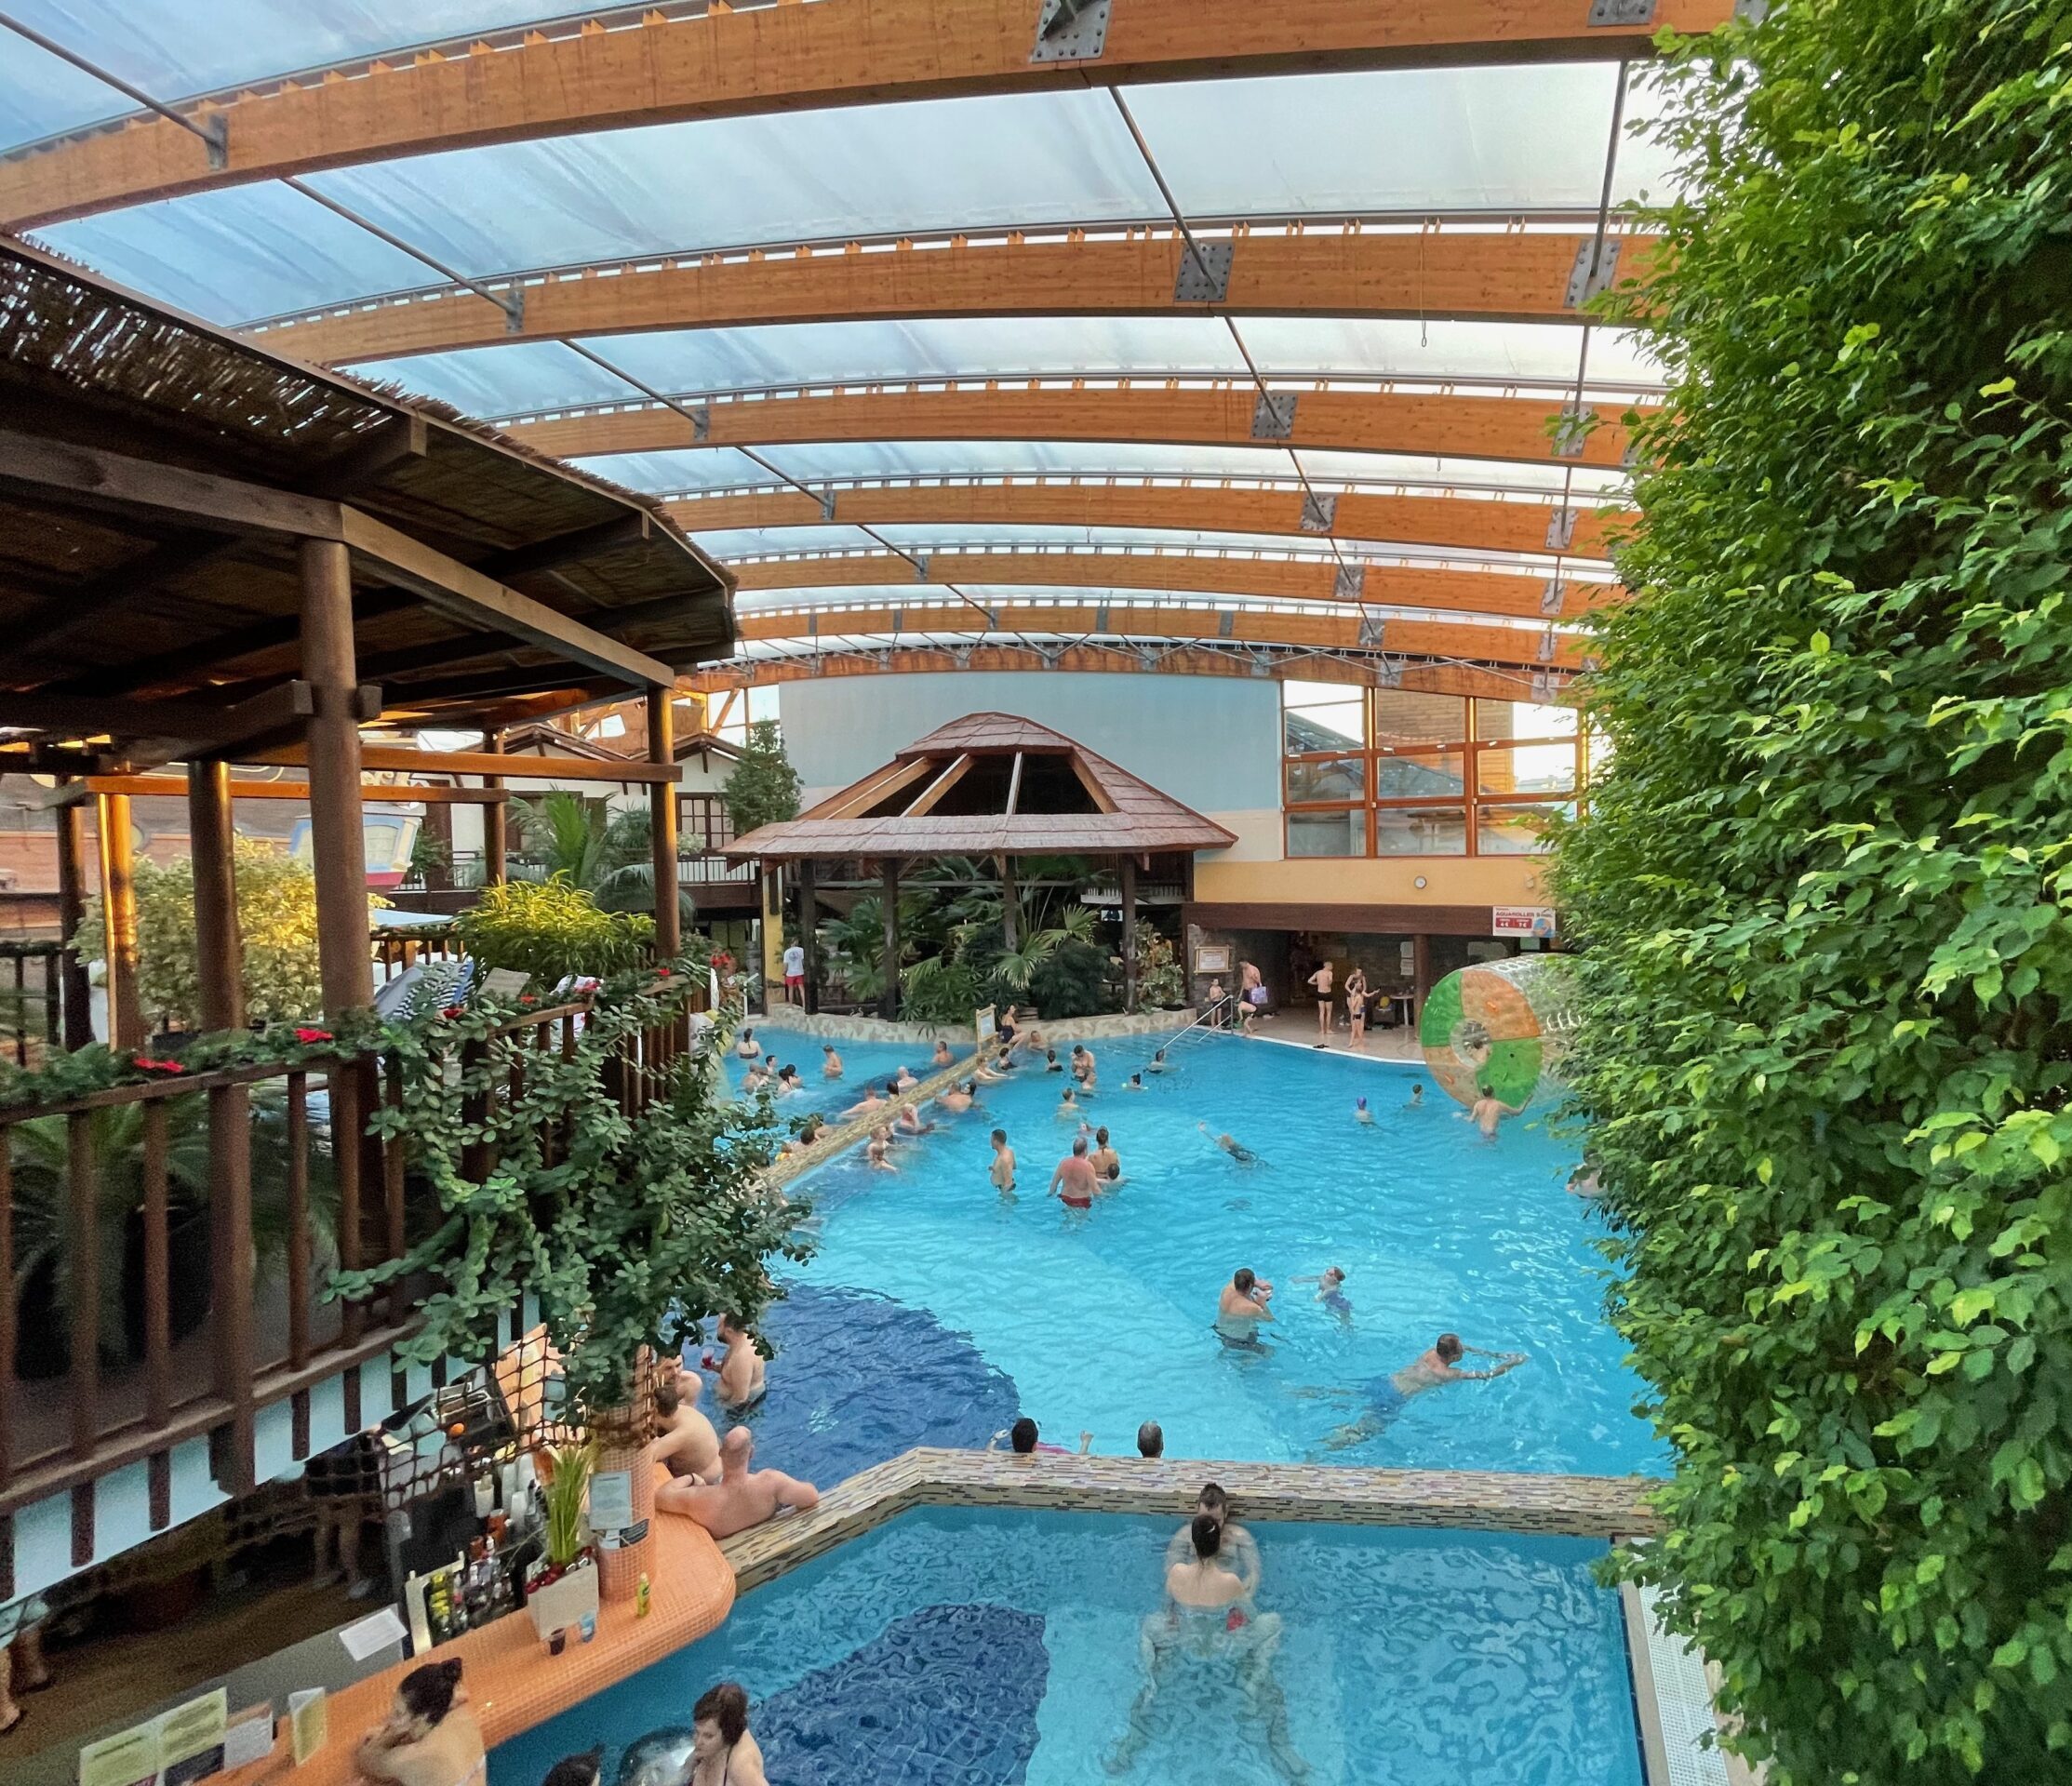 Thermal pools in Slovakia. Tatralandia or/and Besenova – which one to choose? Honest comparison.